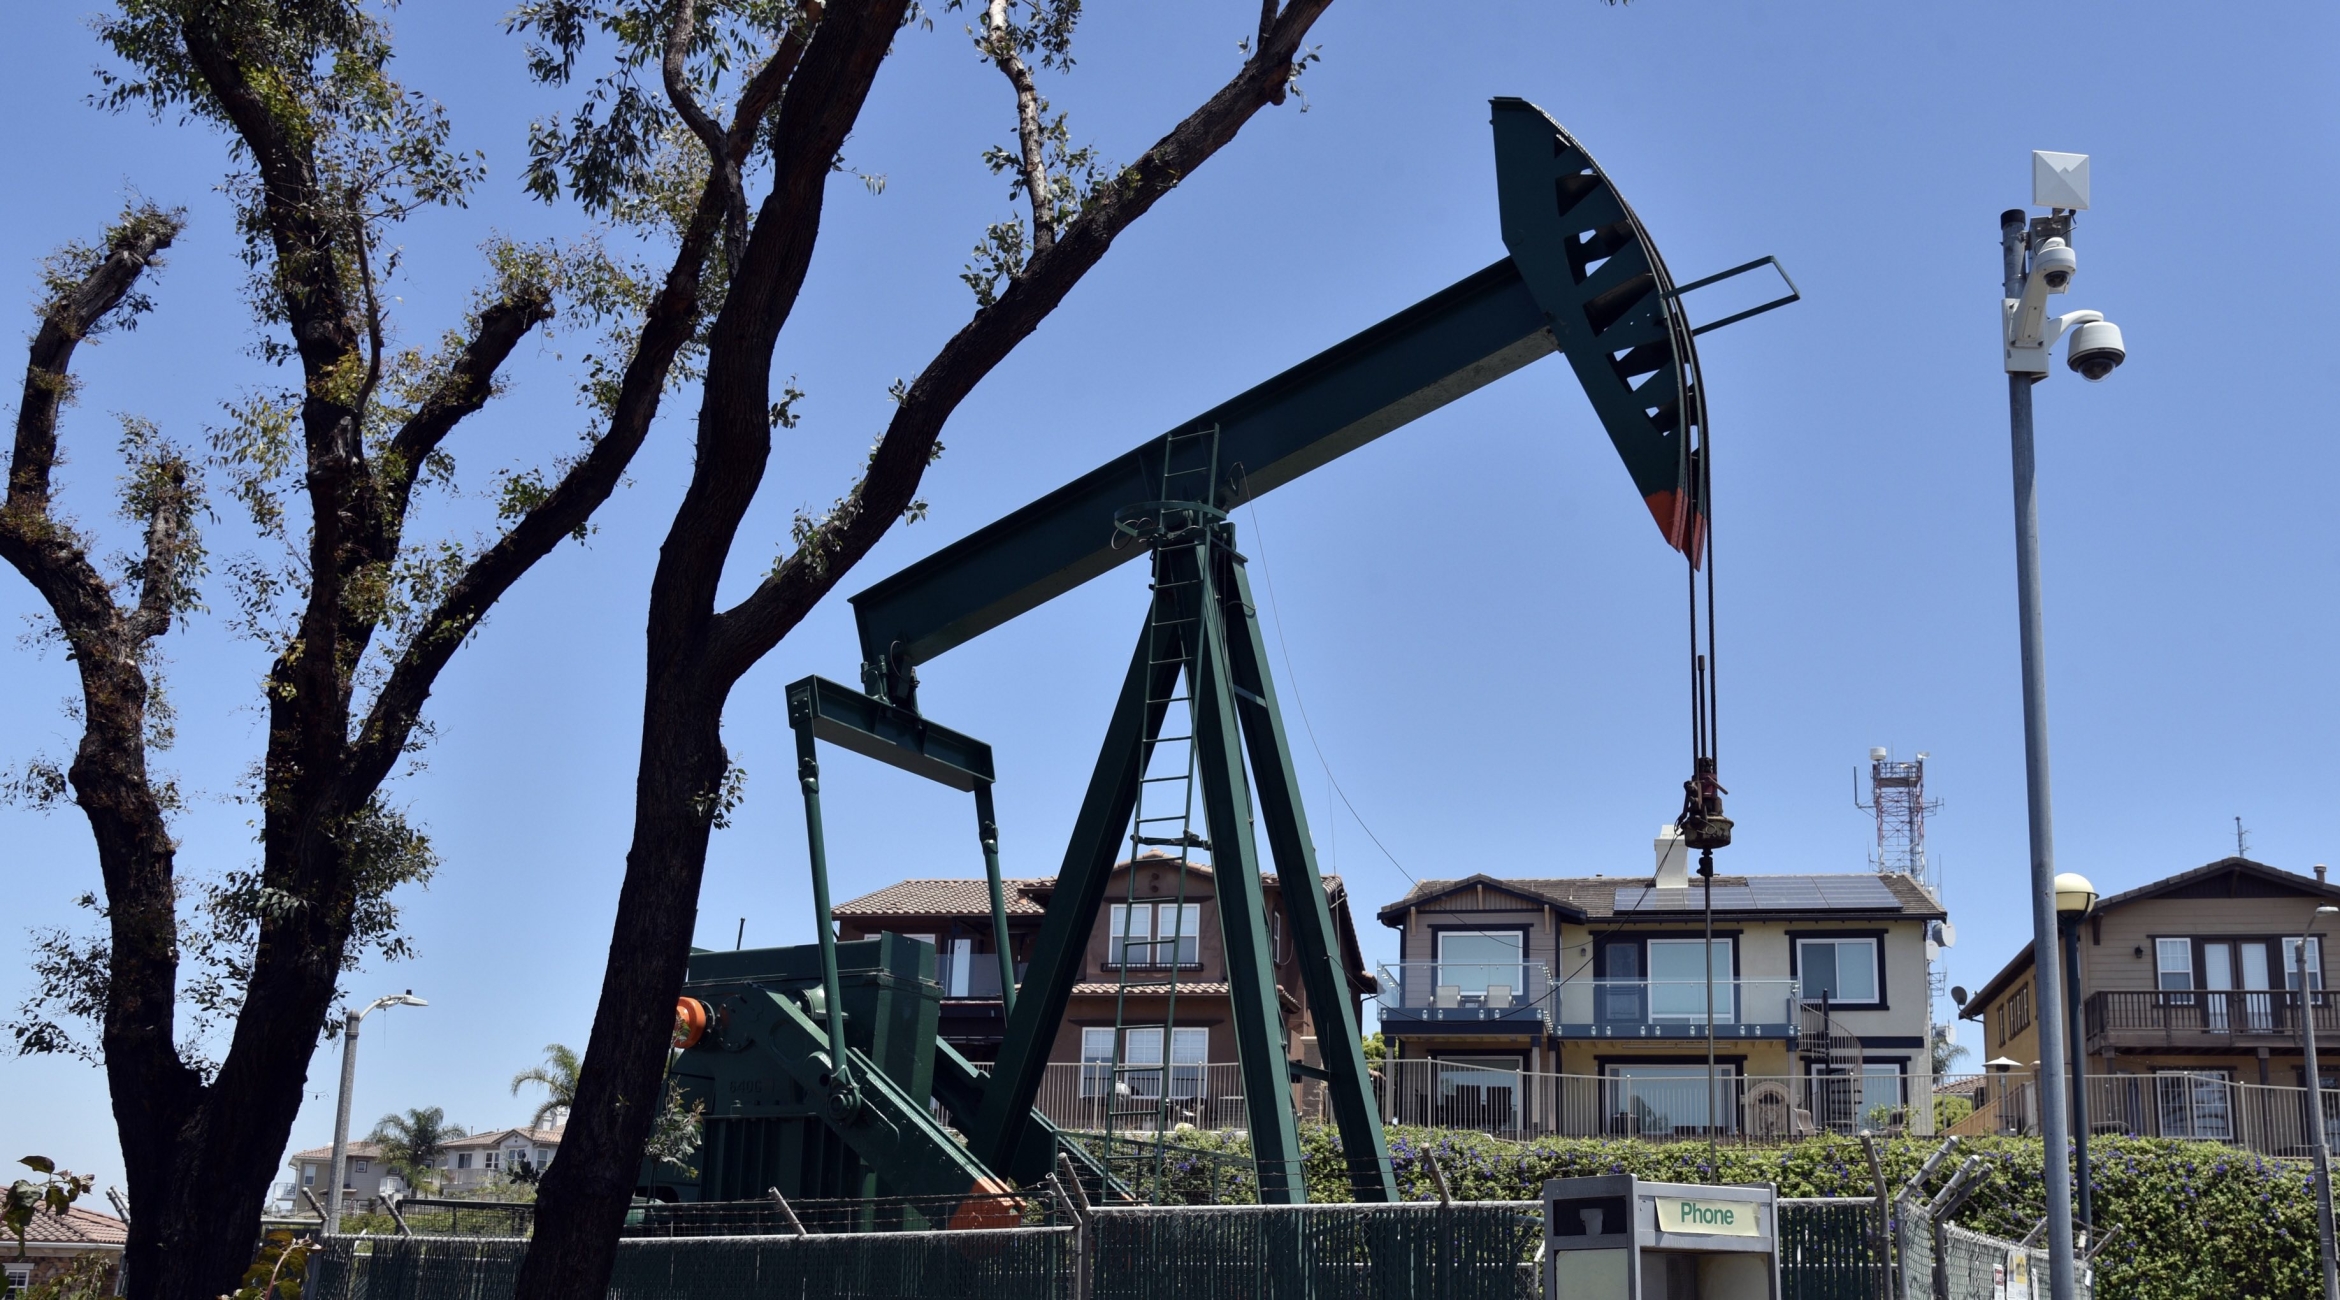 A pumpjack nestled between trees and luxury homes.